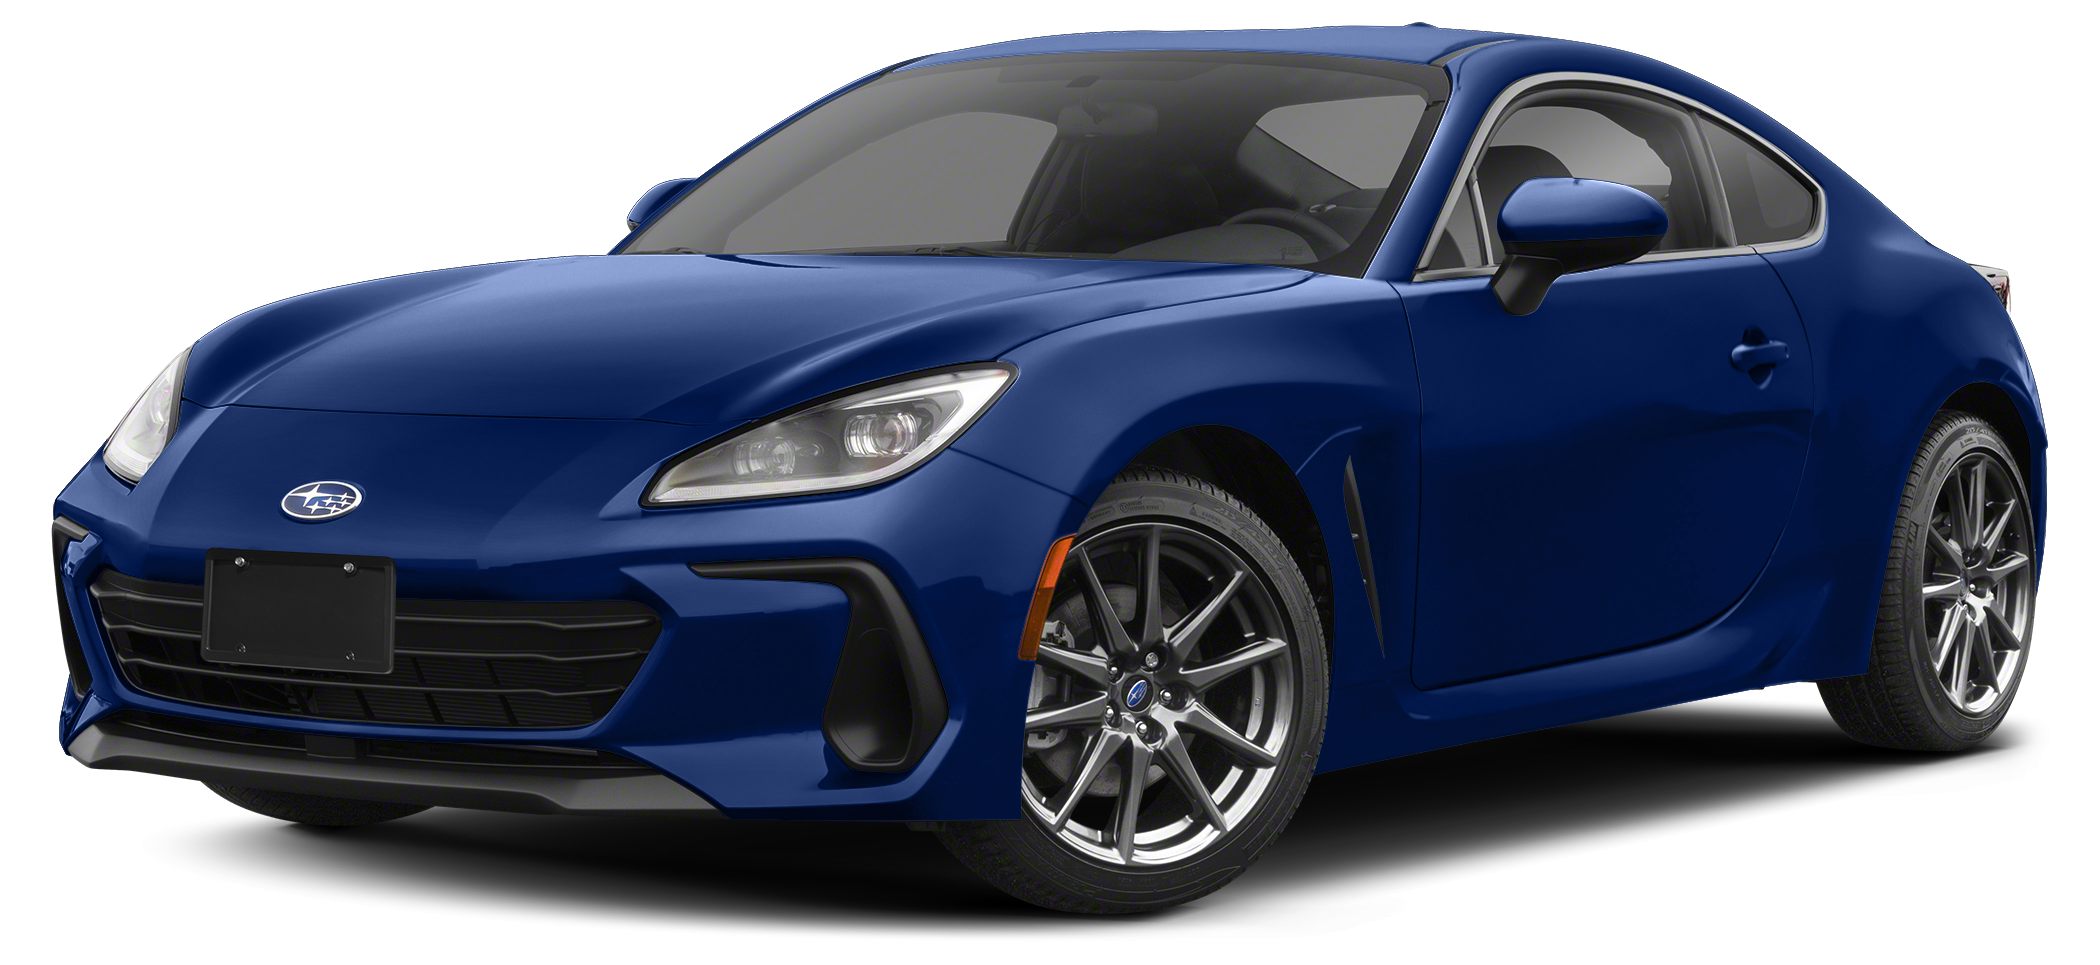 New Subaru BRZ launches with more power and torque